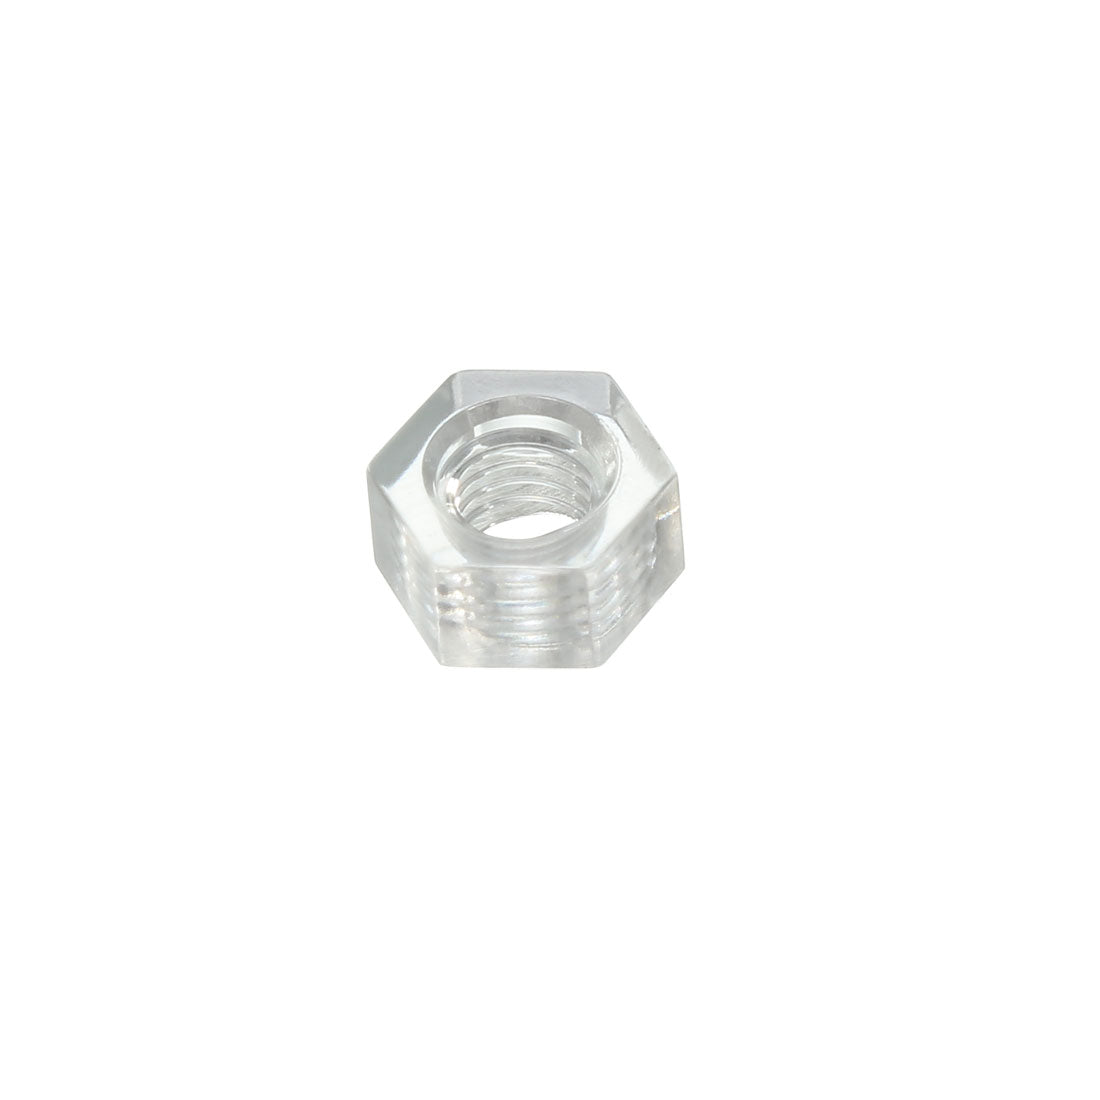 uxcell Uxcell Hex Nut, Metric Acrylic M3x0.5mm Thread Hexagon Nuts Clear 100pcs